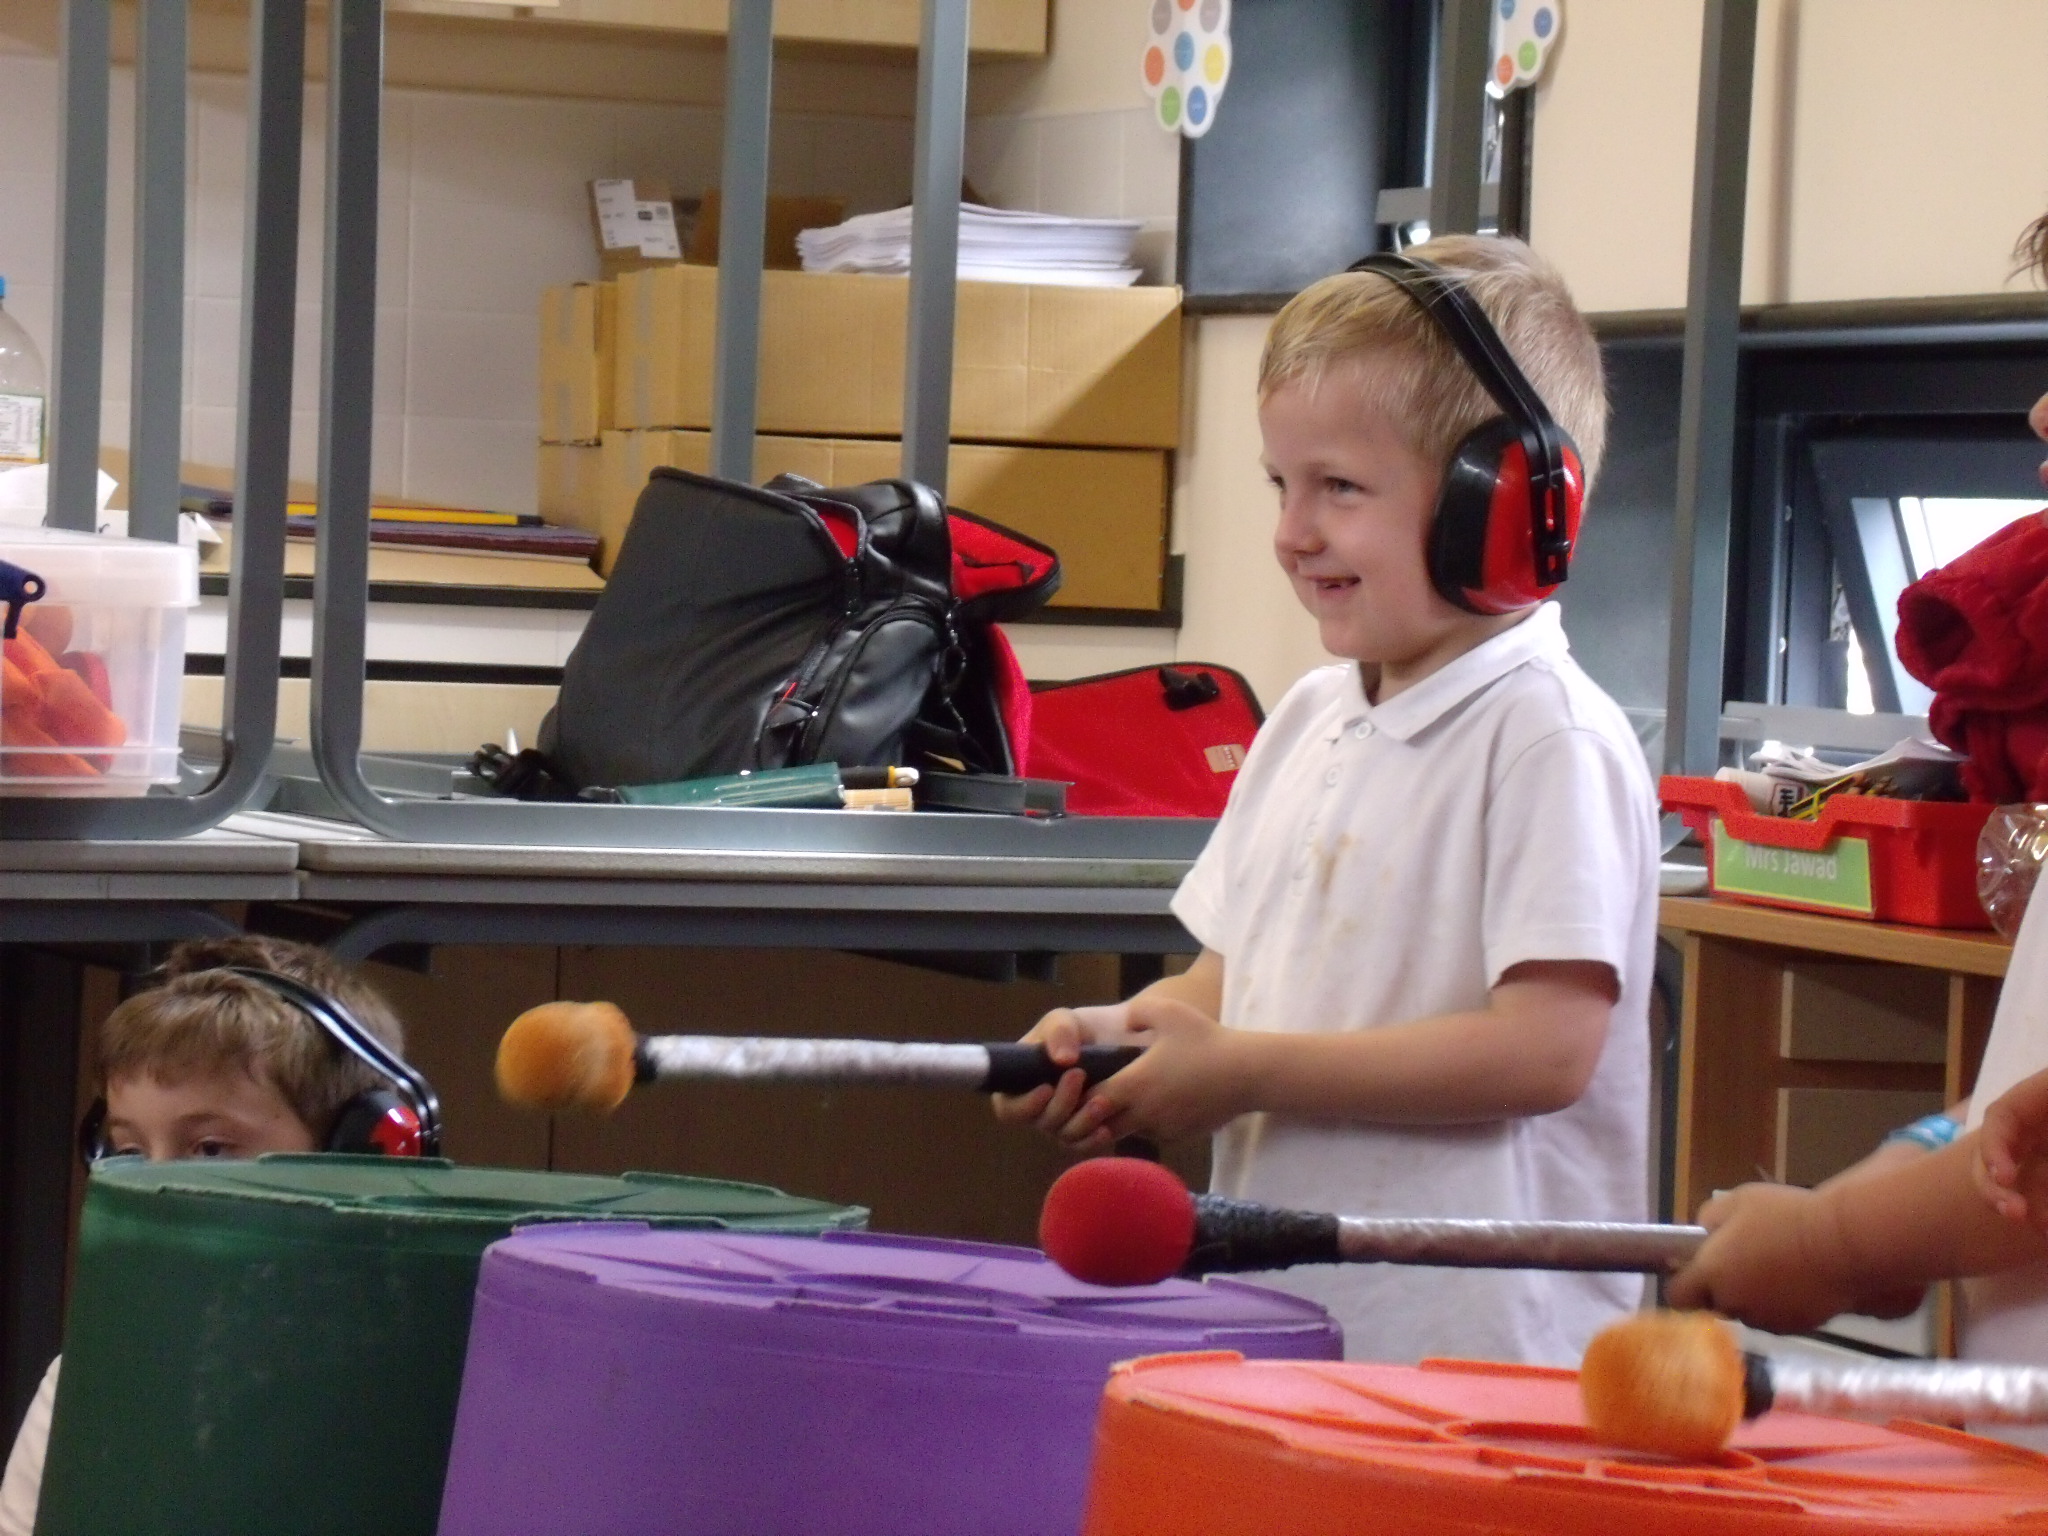 School children playing music on large colourful empty bins